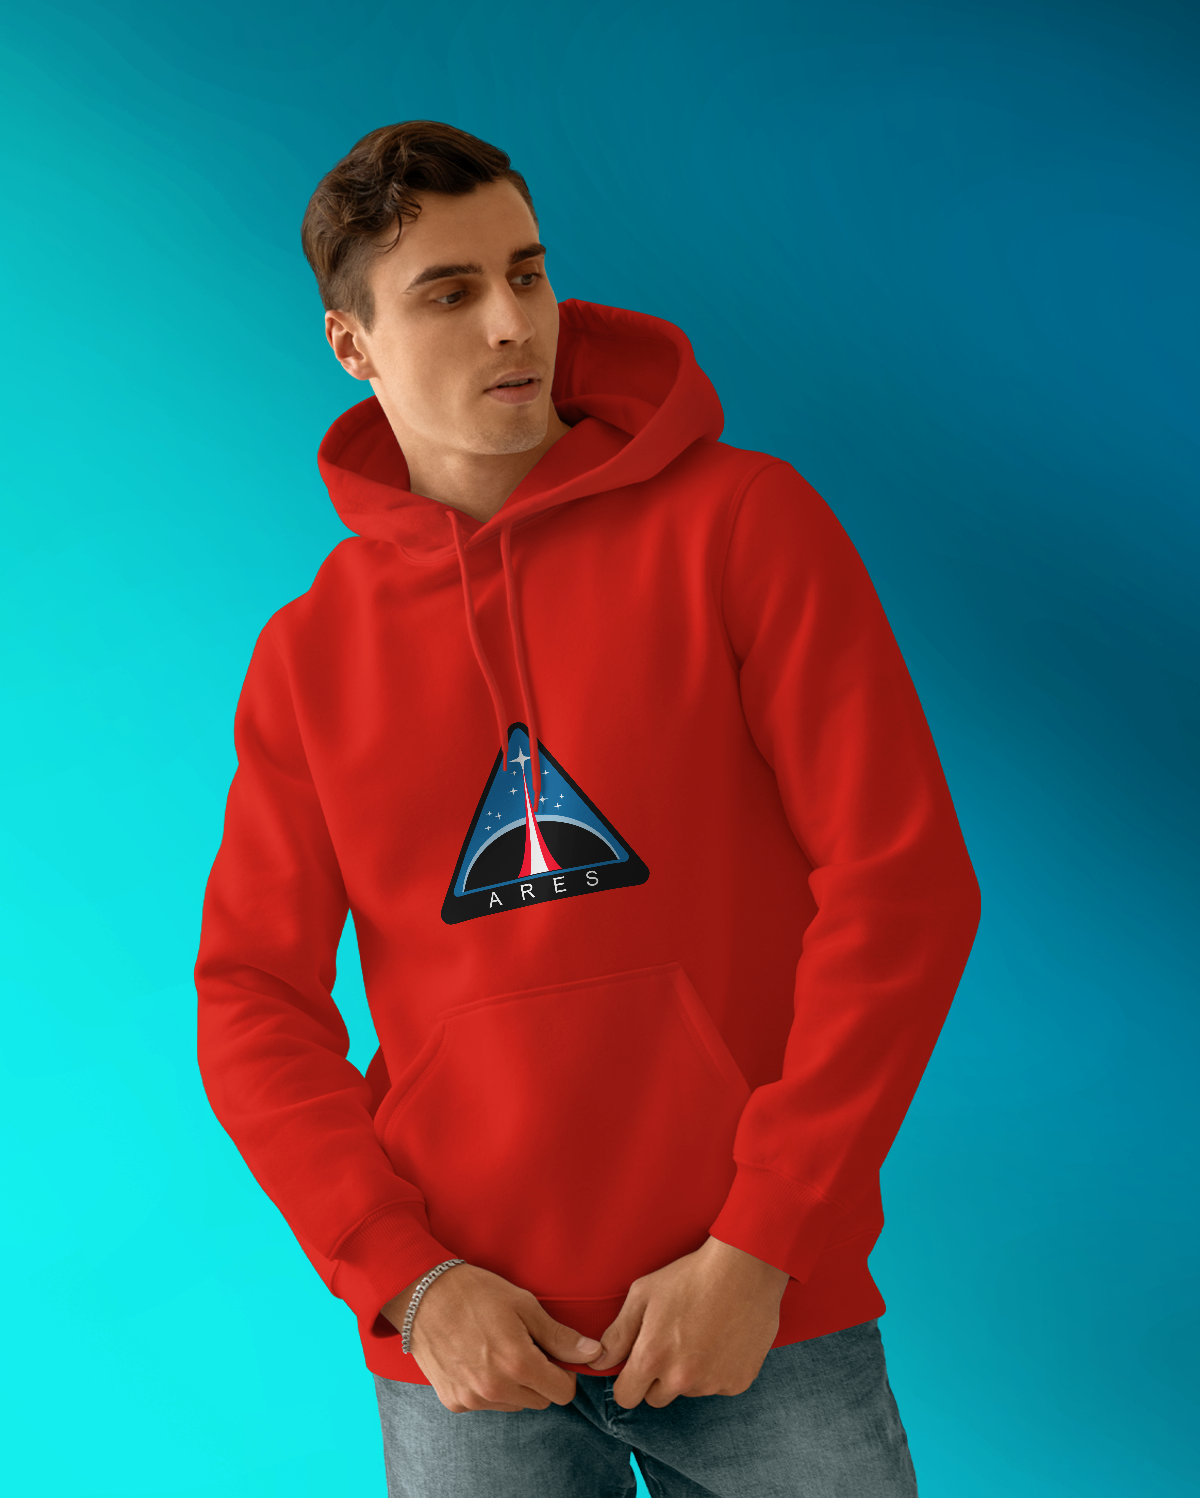 Hoodie For Men (Ares)